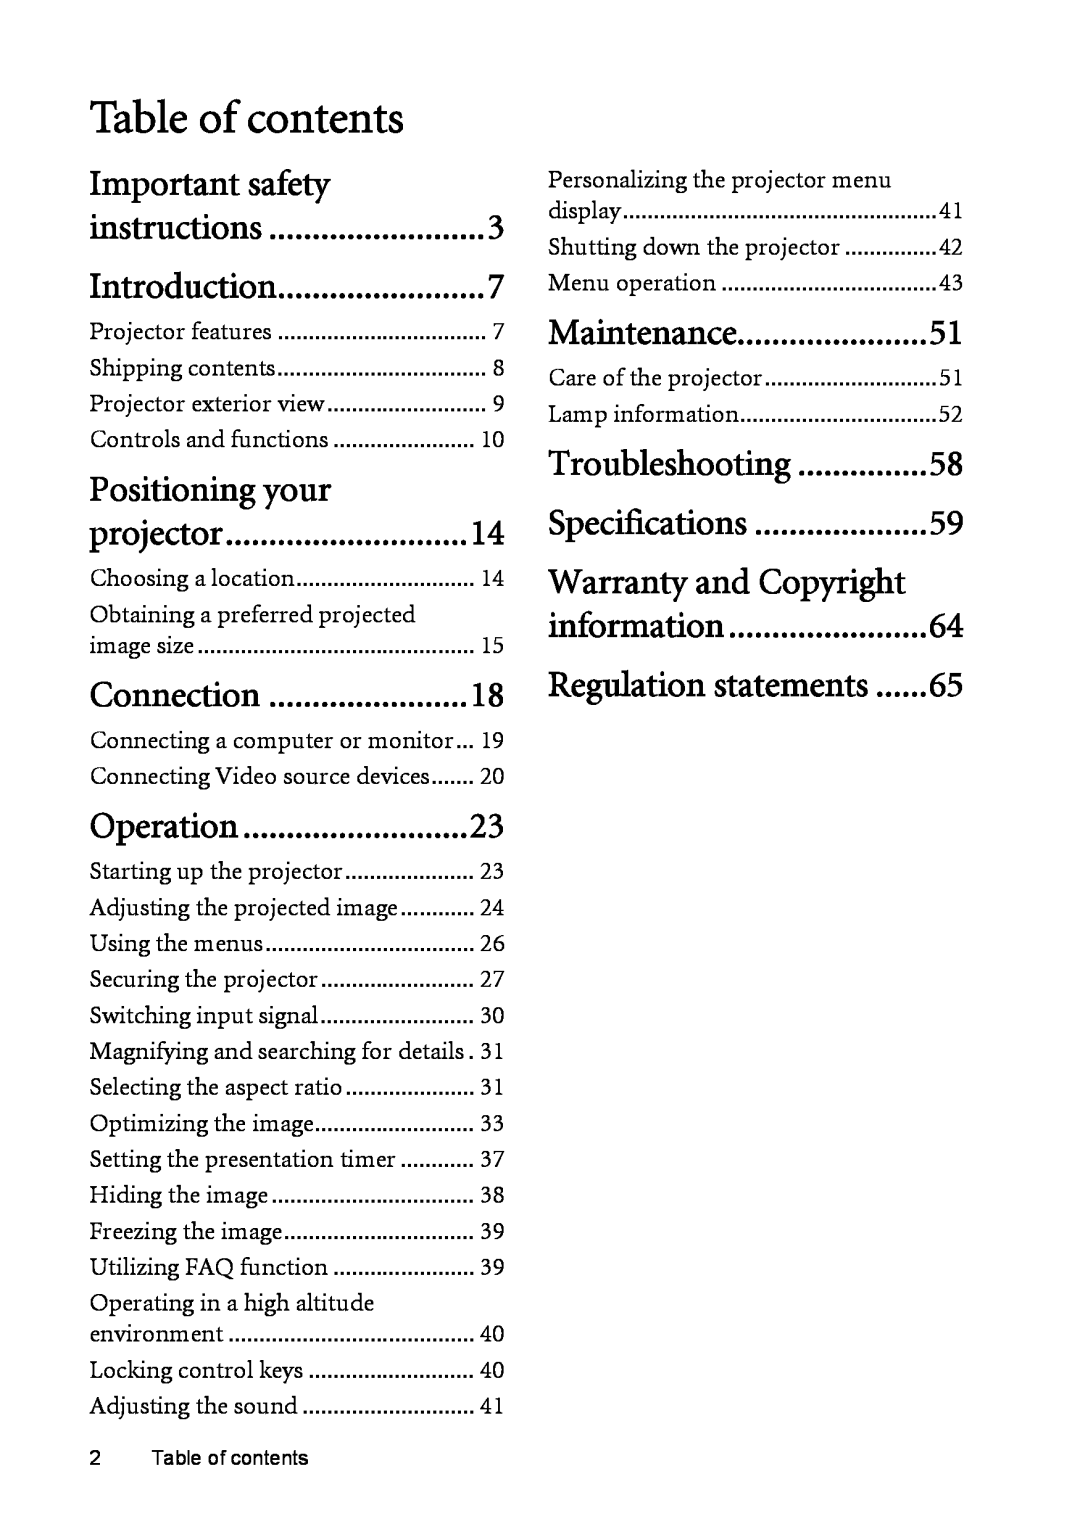 BenQ MP525 ST user manual Table of contents, Important safety, Positioning your, Warranty and Copyright 